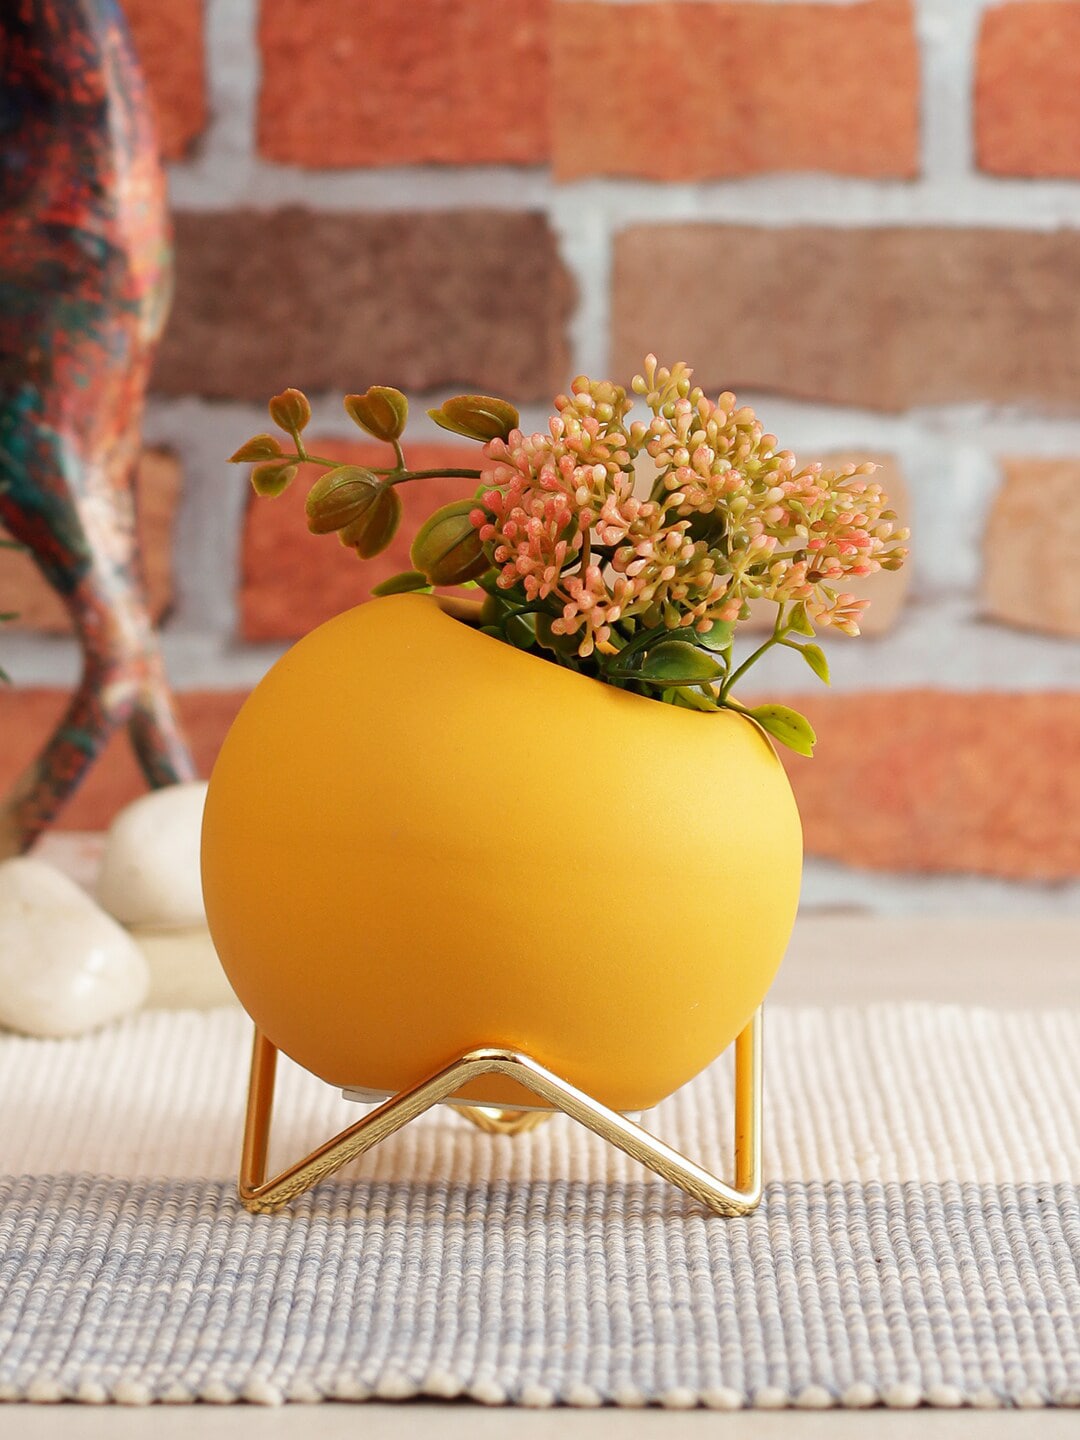 TAYHAA Yellow Solid Ceramic Flower Vase With Gold-Toned Stand Price in India